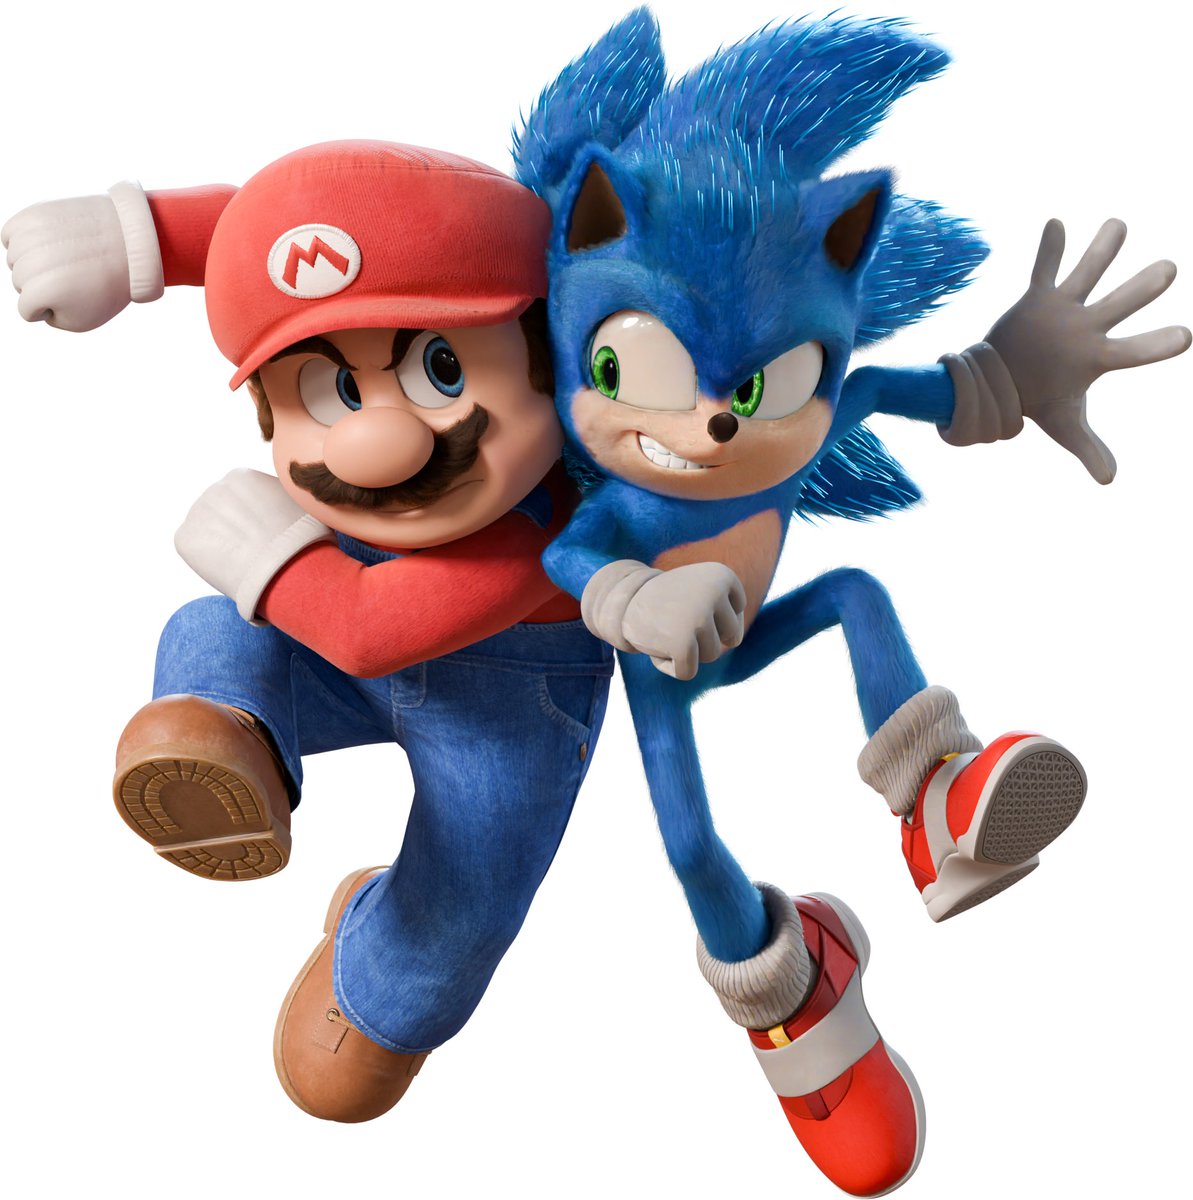 Someday a crossover like this will happen
Movie Mario model by Awesome3D
Movie Sonic model by DANCADA
#TheSuperMarioBrosMovie #MarioMovie #SonicMovie